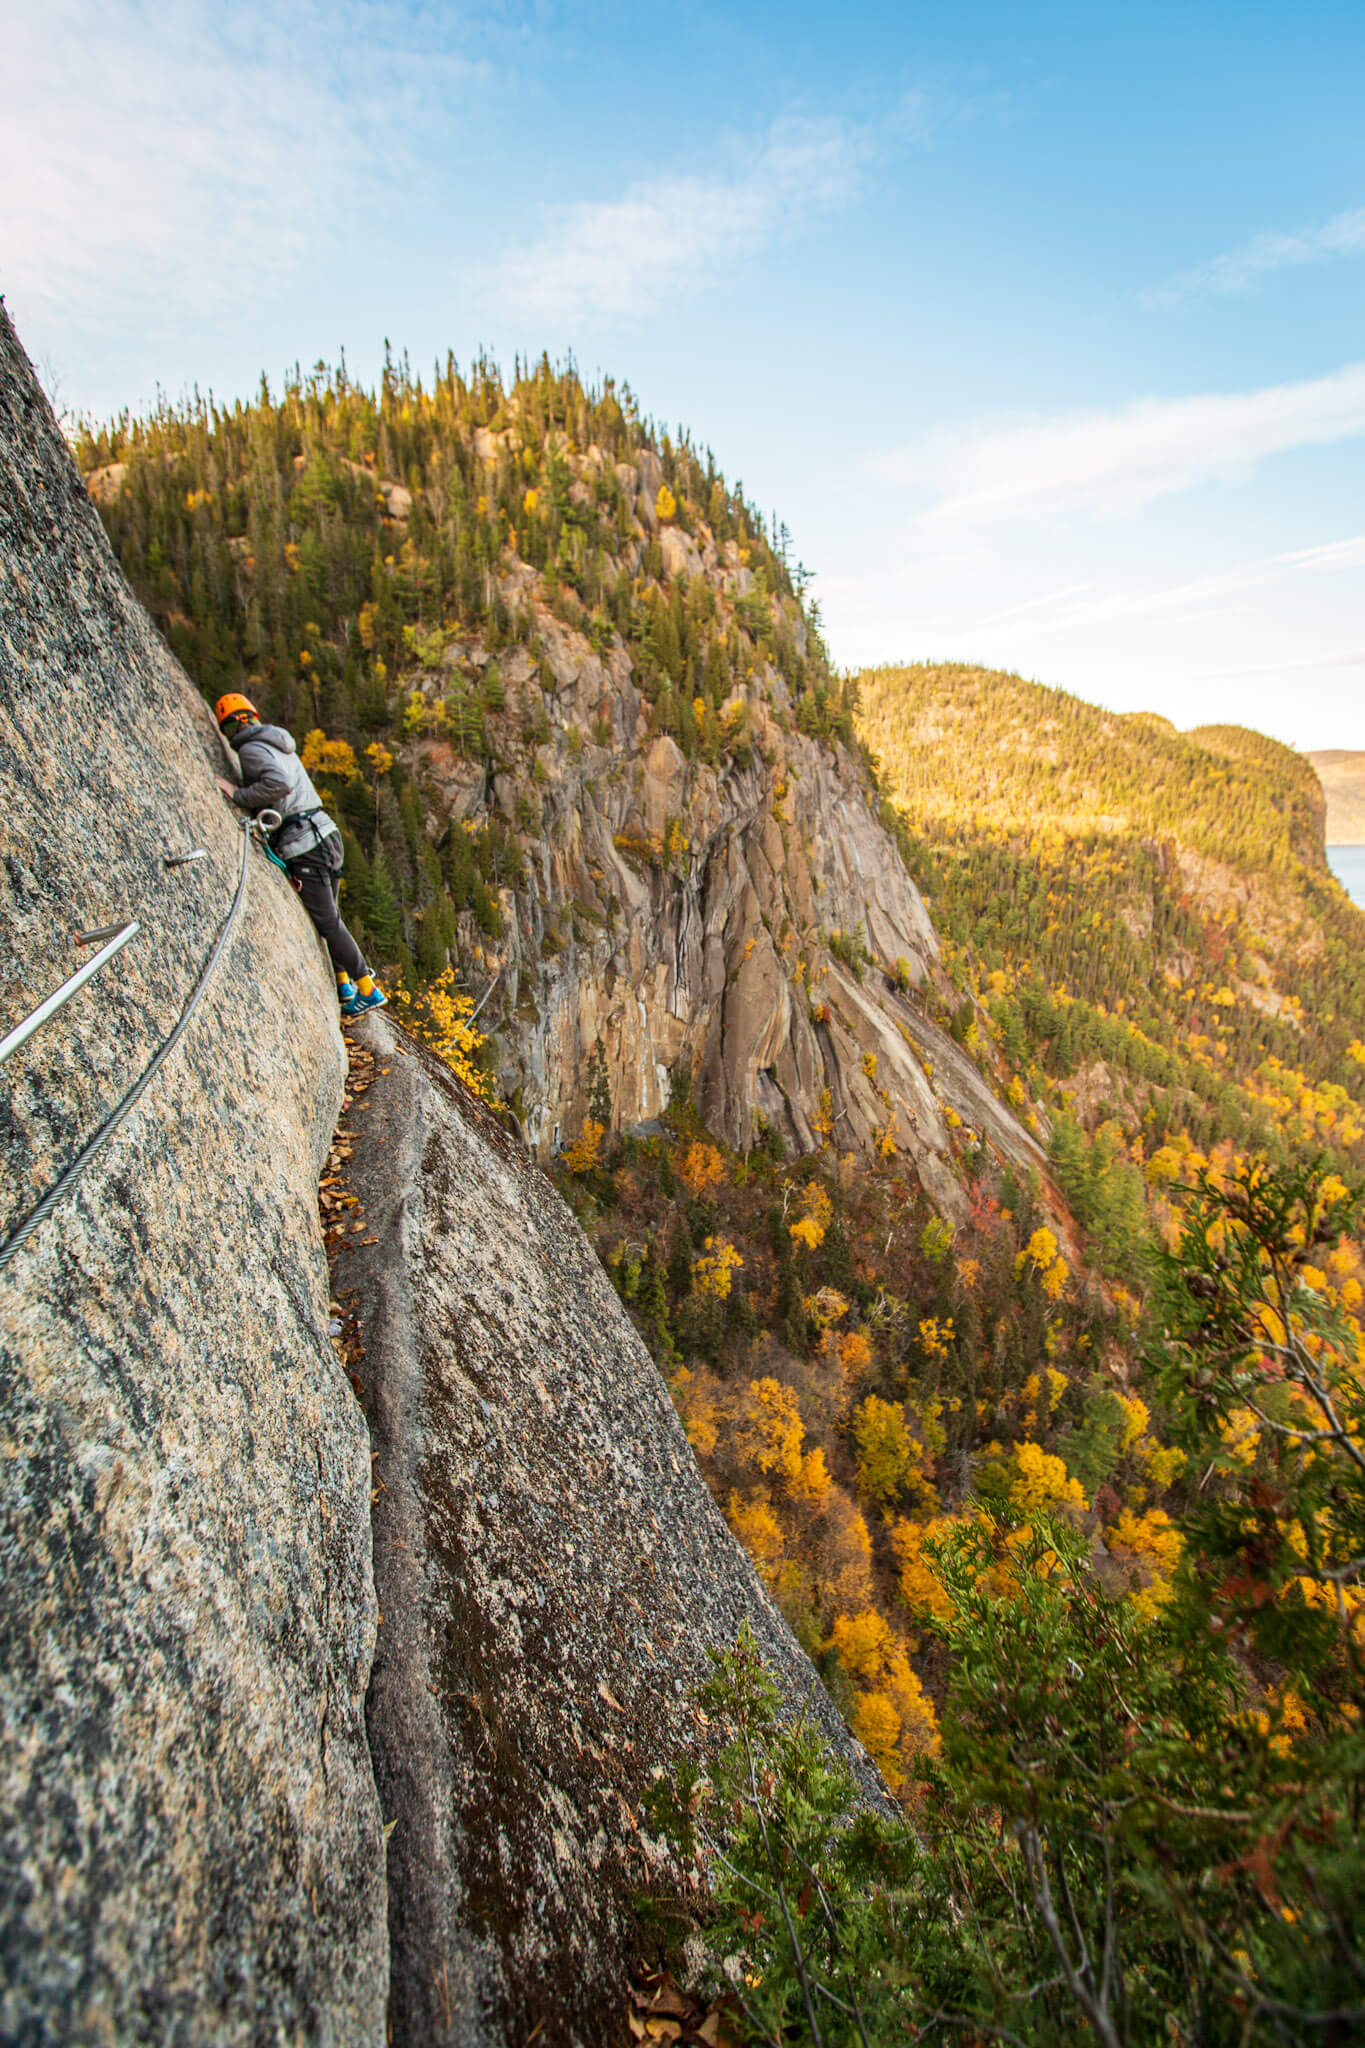 A rock climbers clings to the wall along a via ferrata route in the Saguenay Fjord National Park